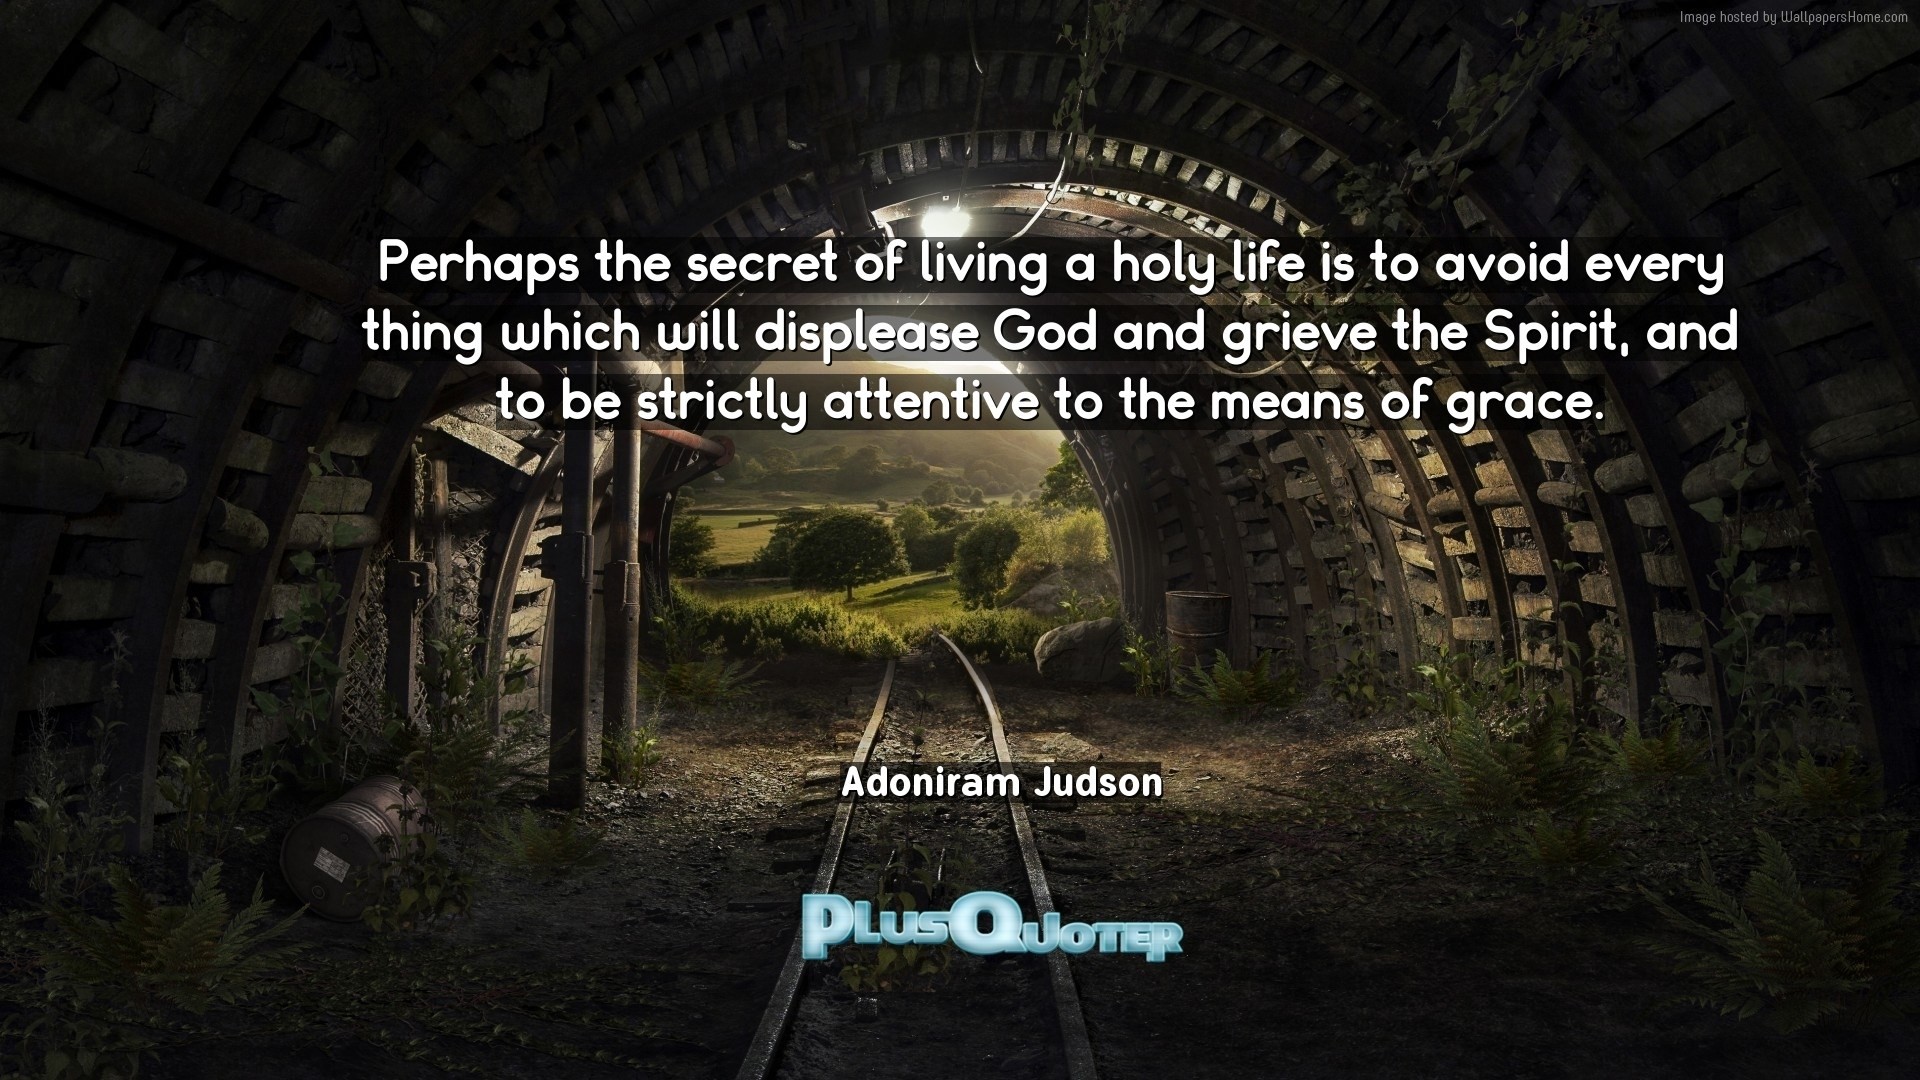 1920x1080 Download Wallpaper with inspirational Quotes- "Perhaps the secret of living  a holy life is. “